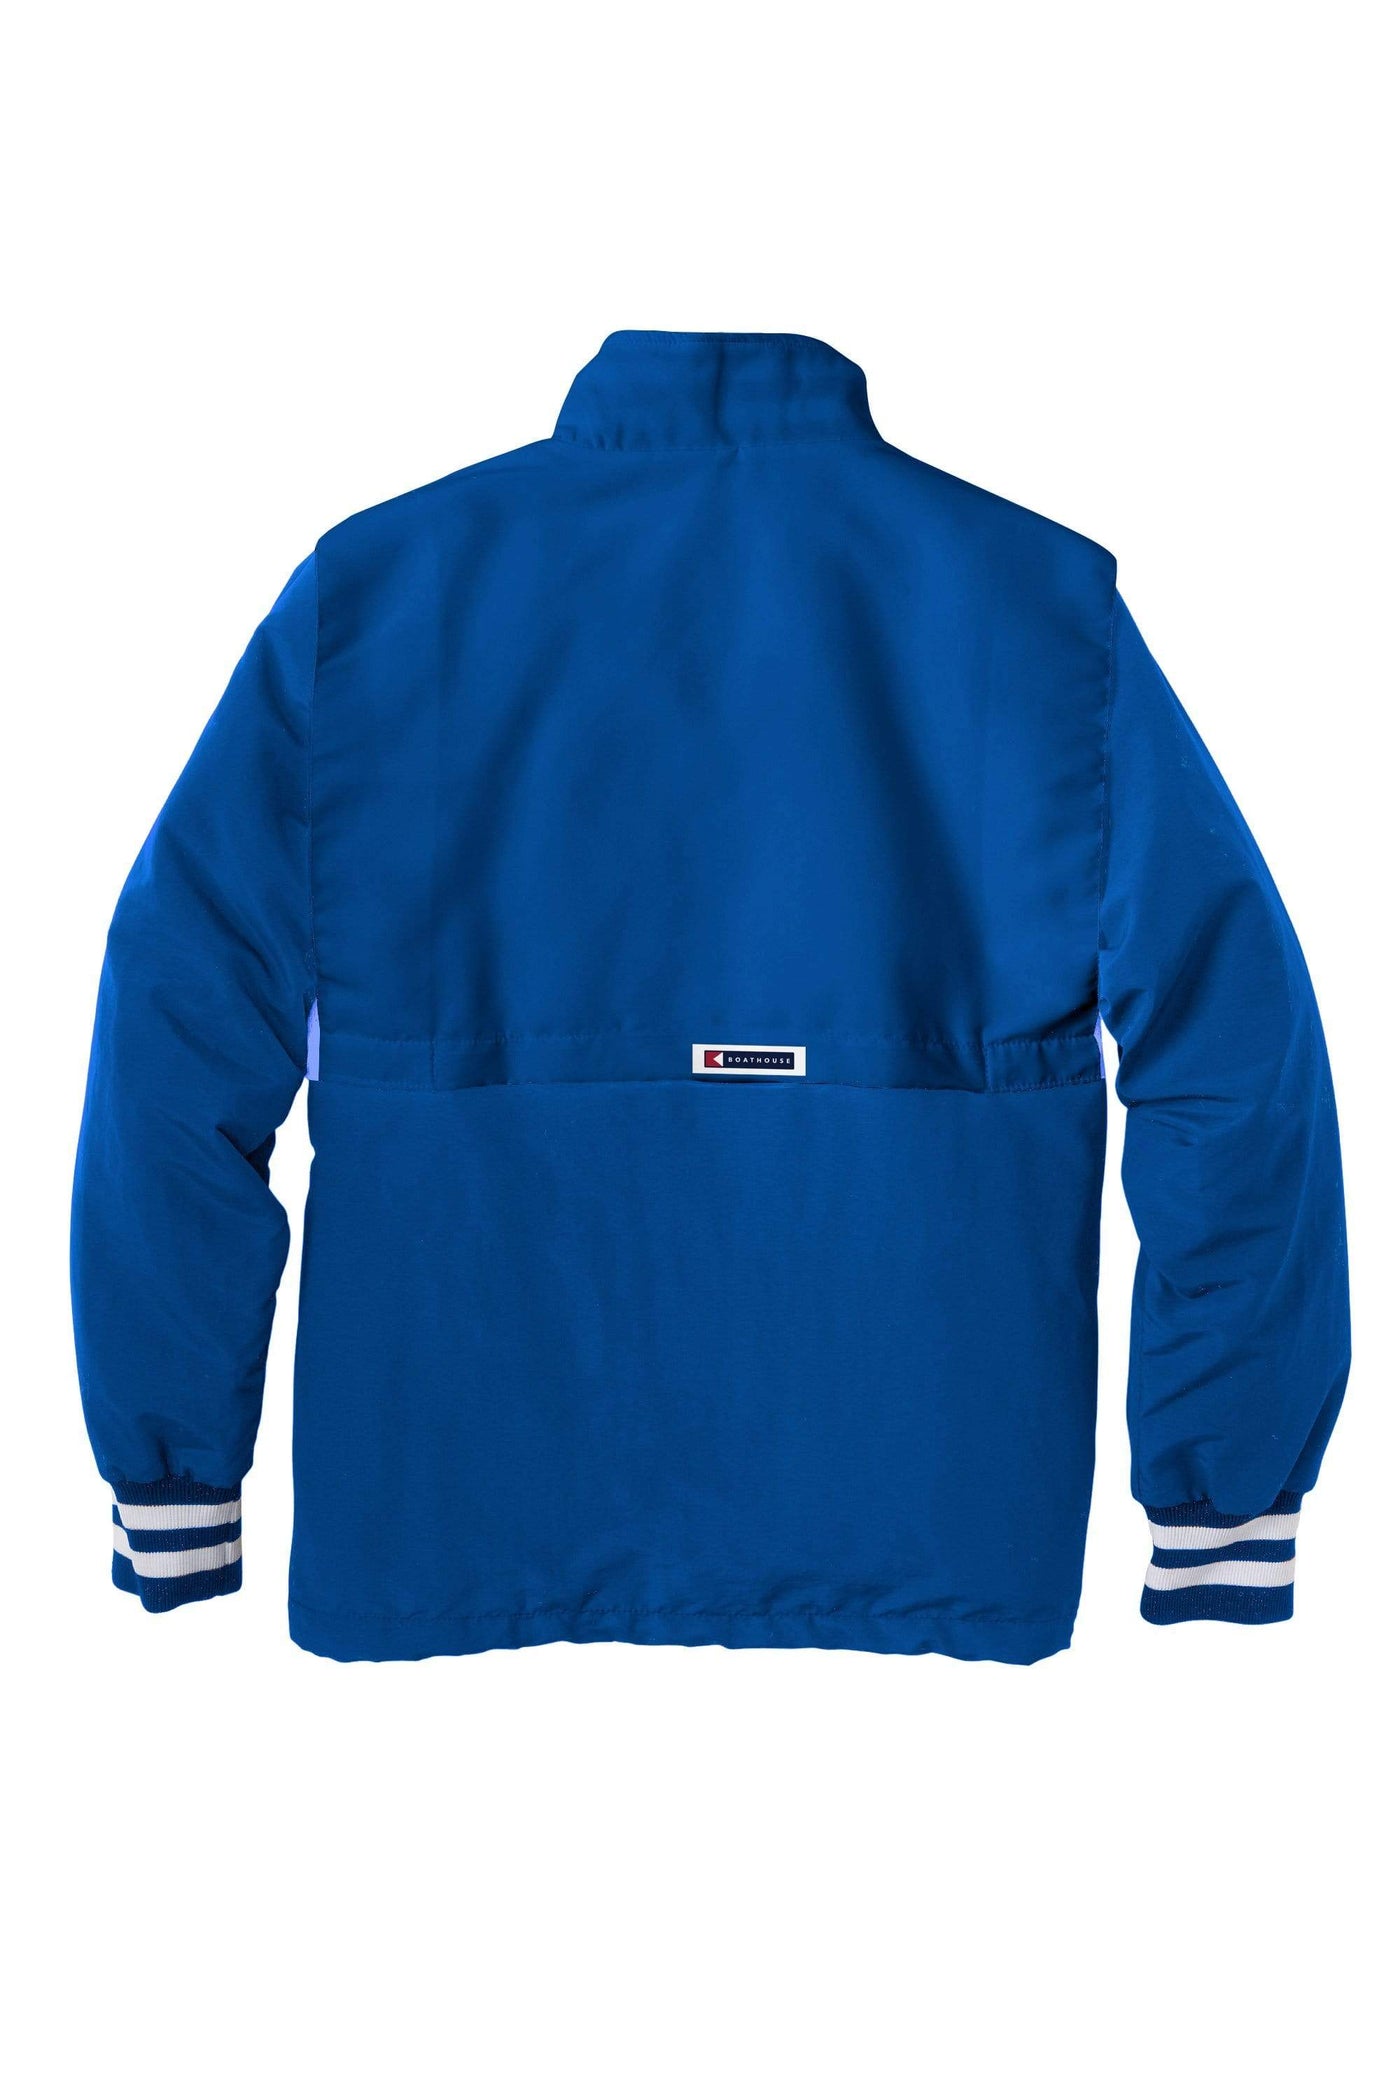 BOATHOUSE The Men's Victory Jacket